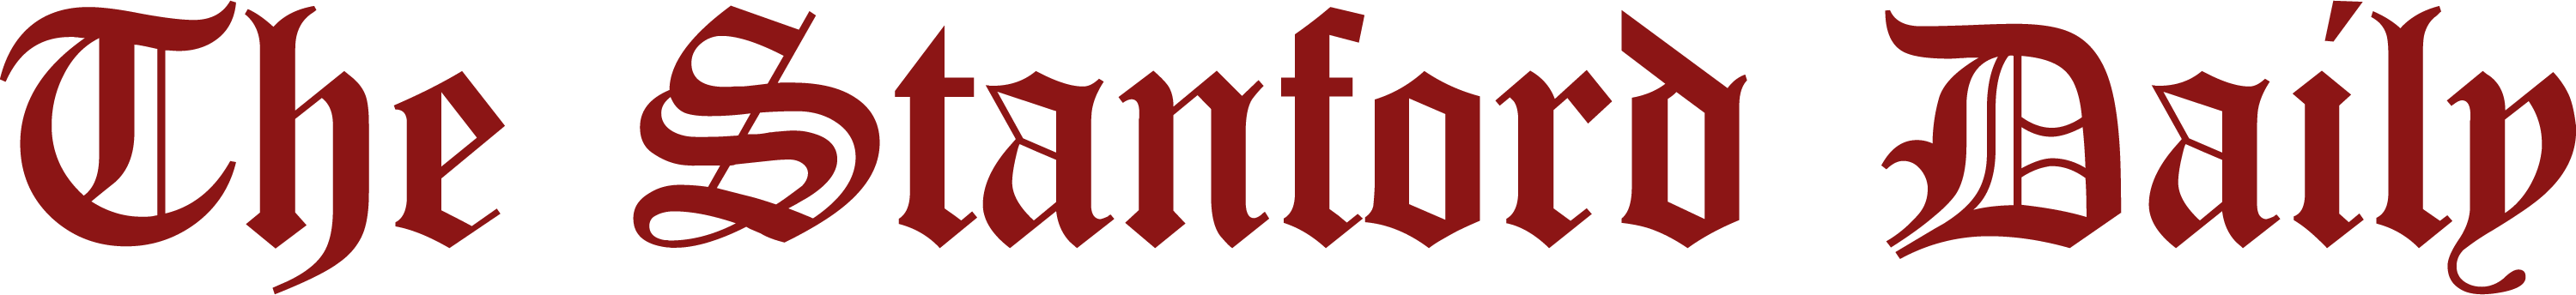 The words 'The Stanford Daily' in Canterbury font